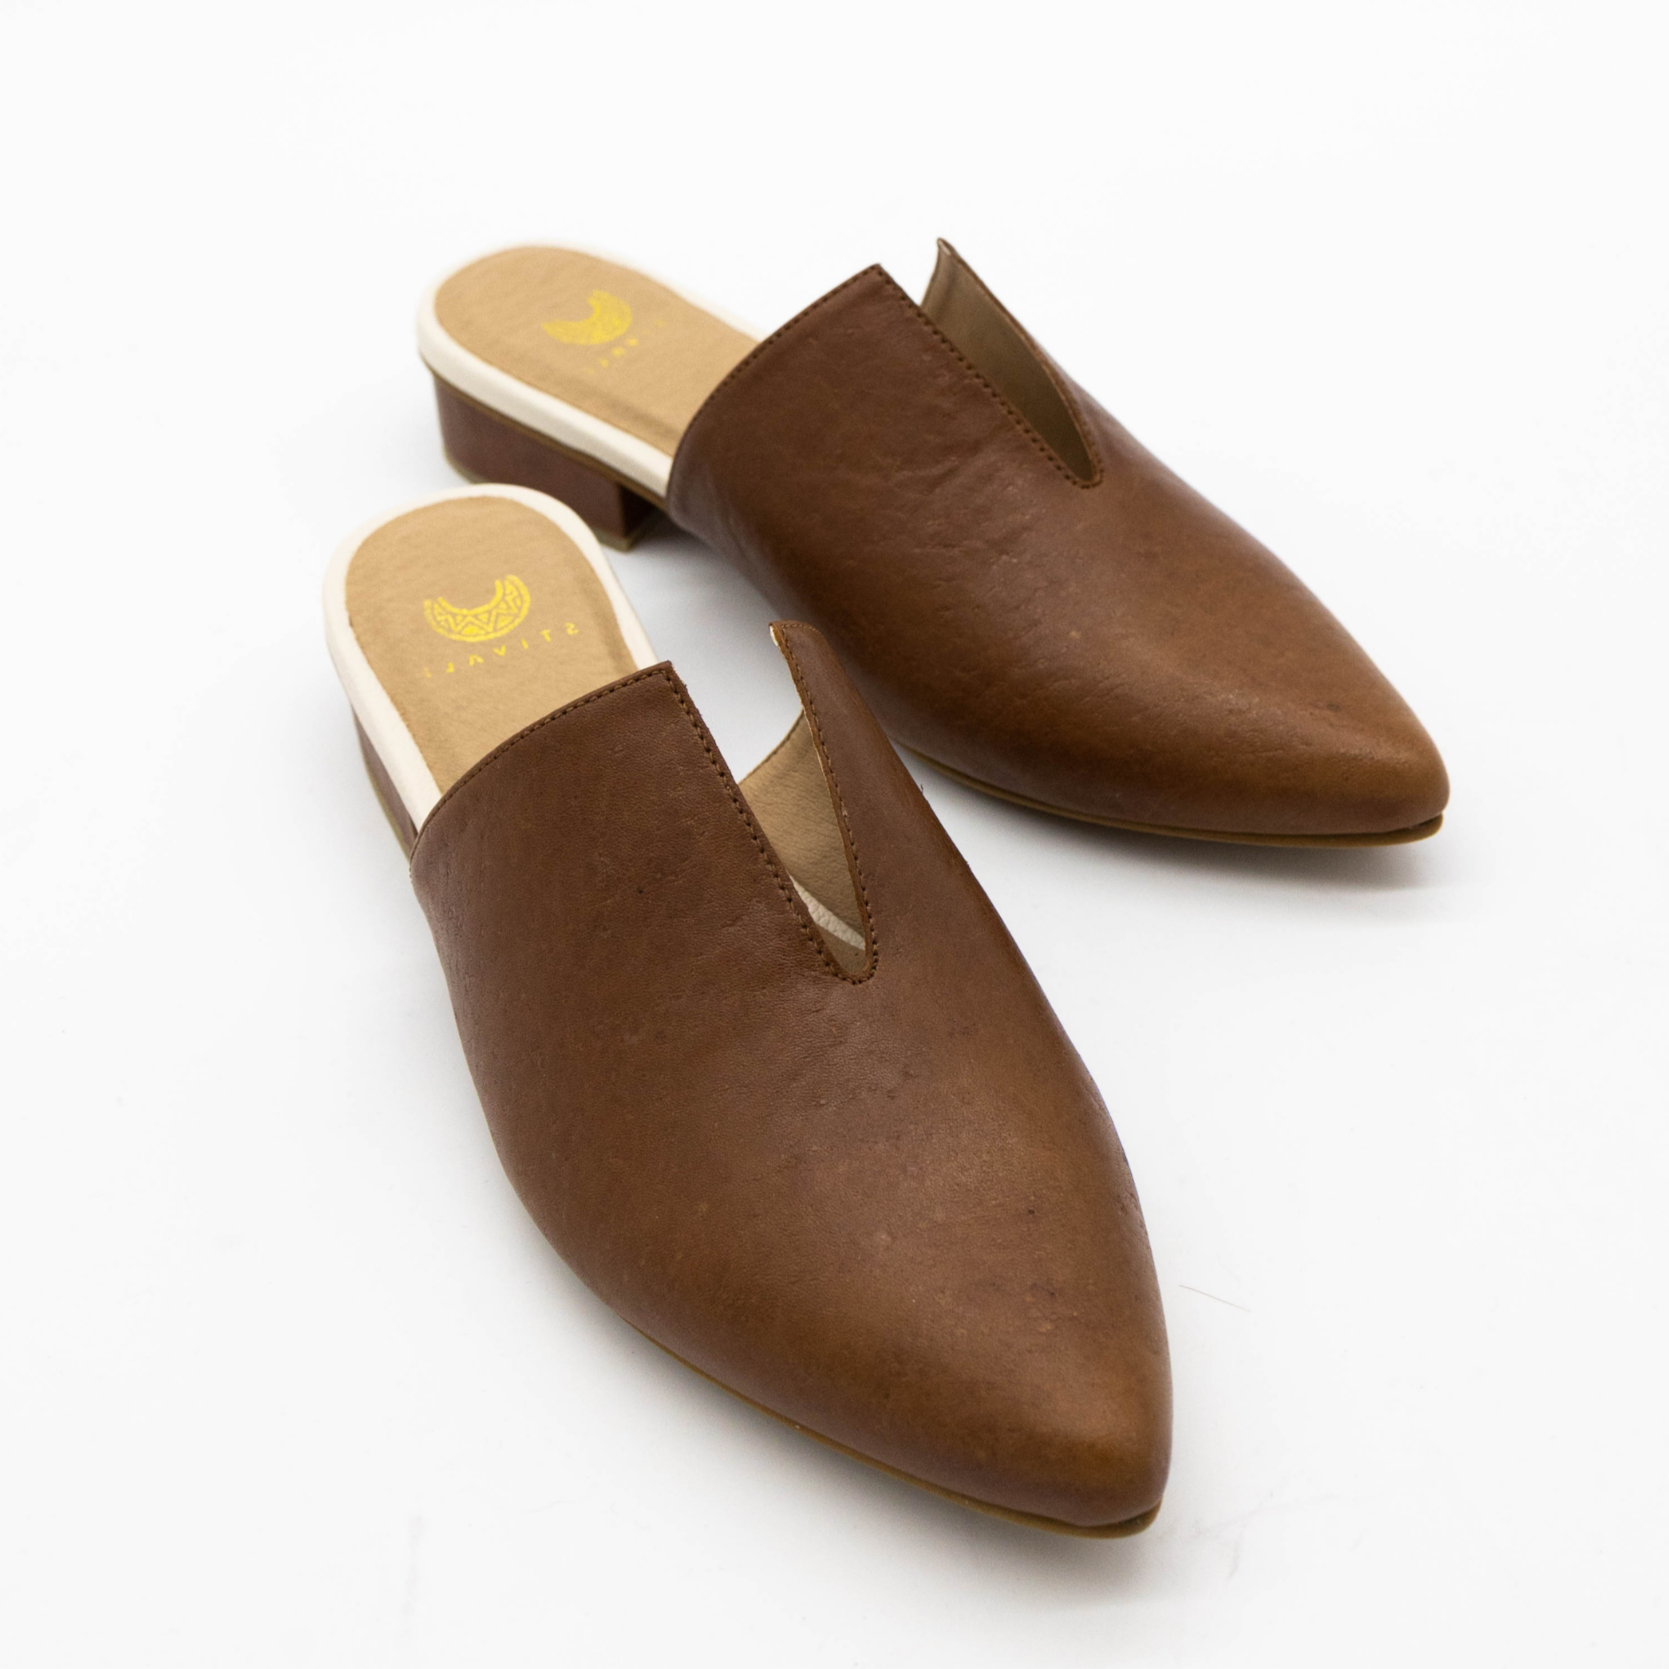 Handcrafted Leather Mule, Honey Tan Smooth Leather. Stivali New York